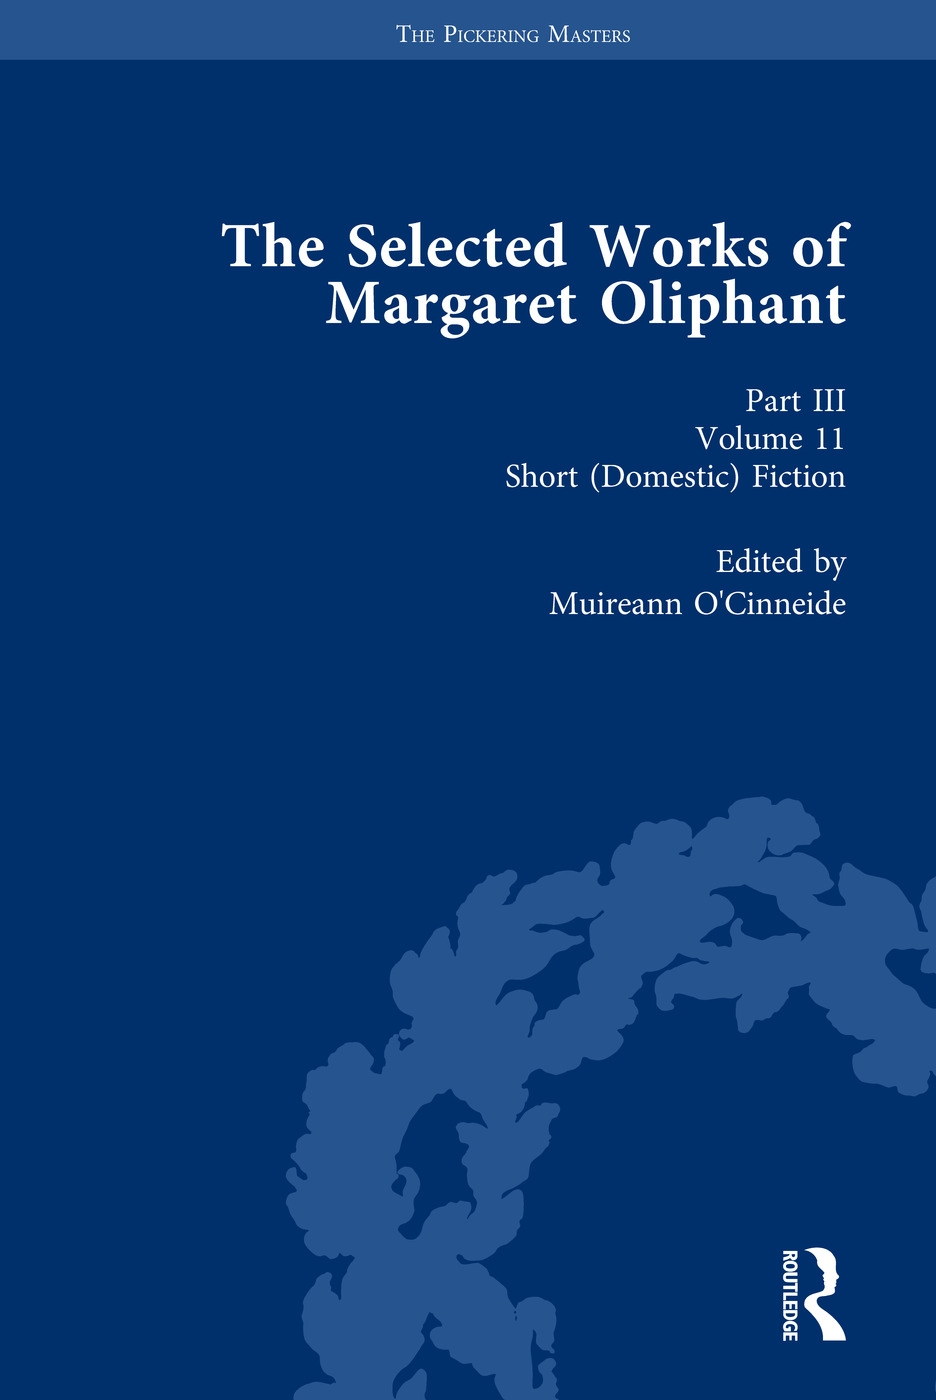 The Selected Works of Margaret Oliphant, Part III Volume 11: Short (Domestic) Fiction